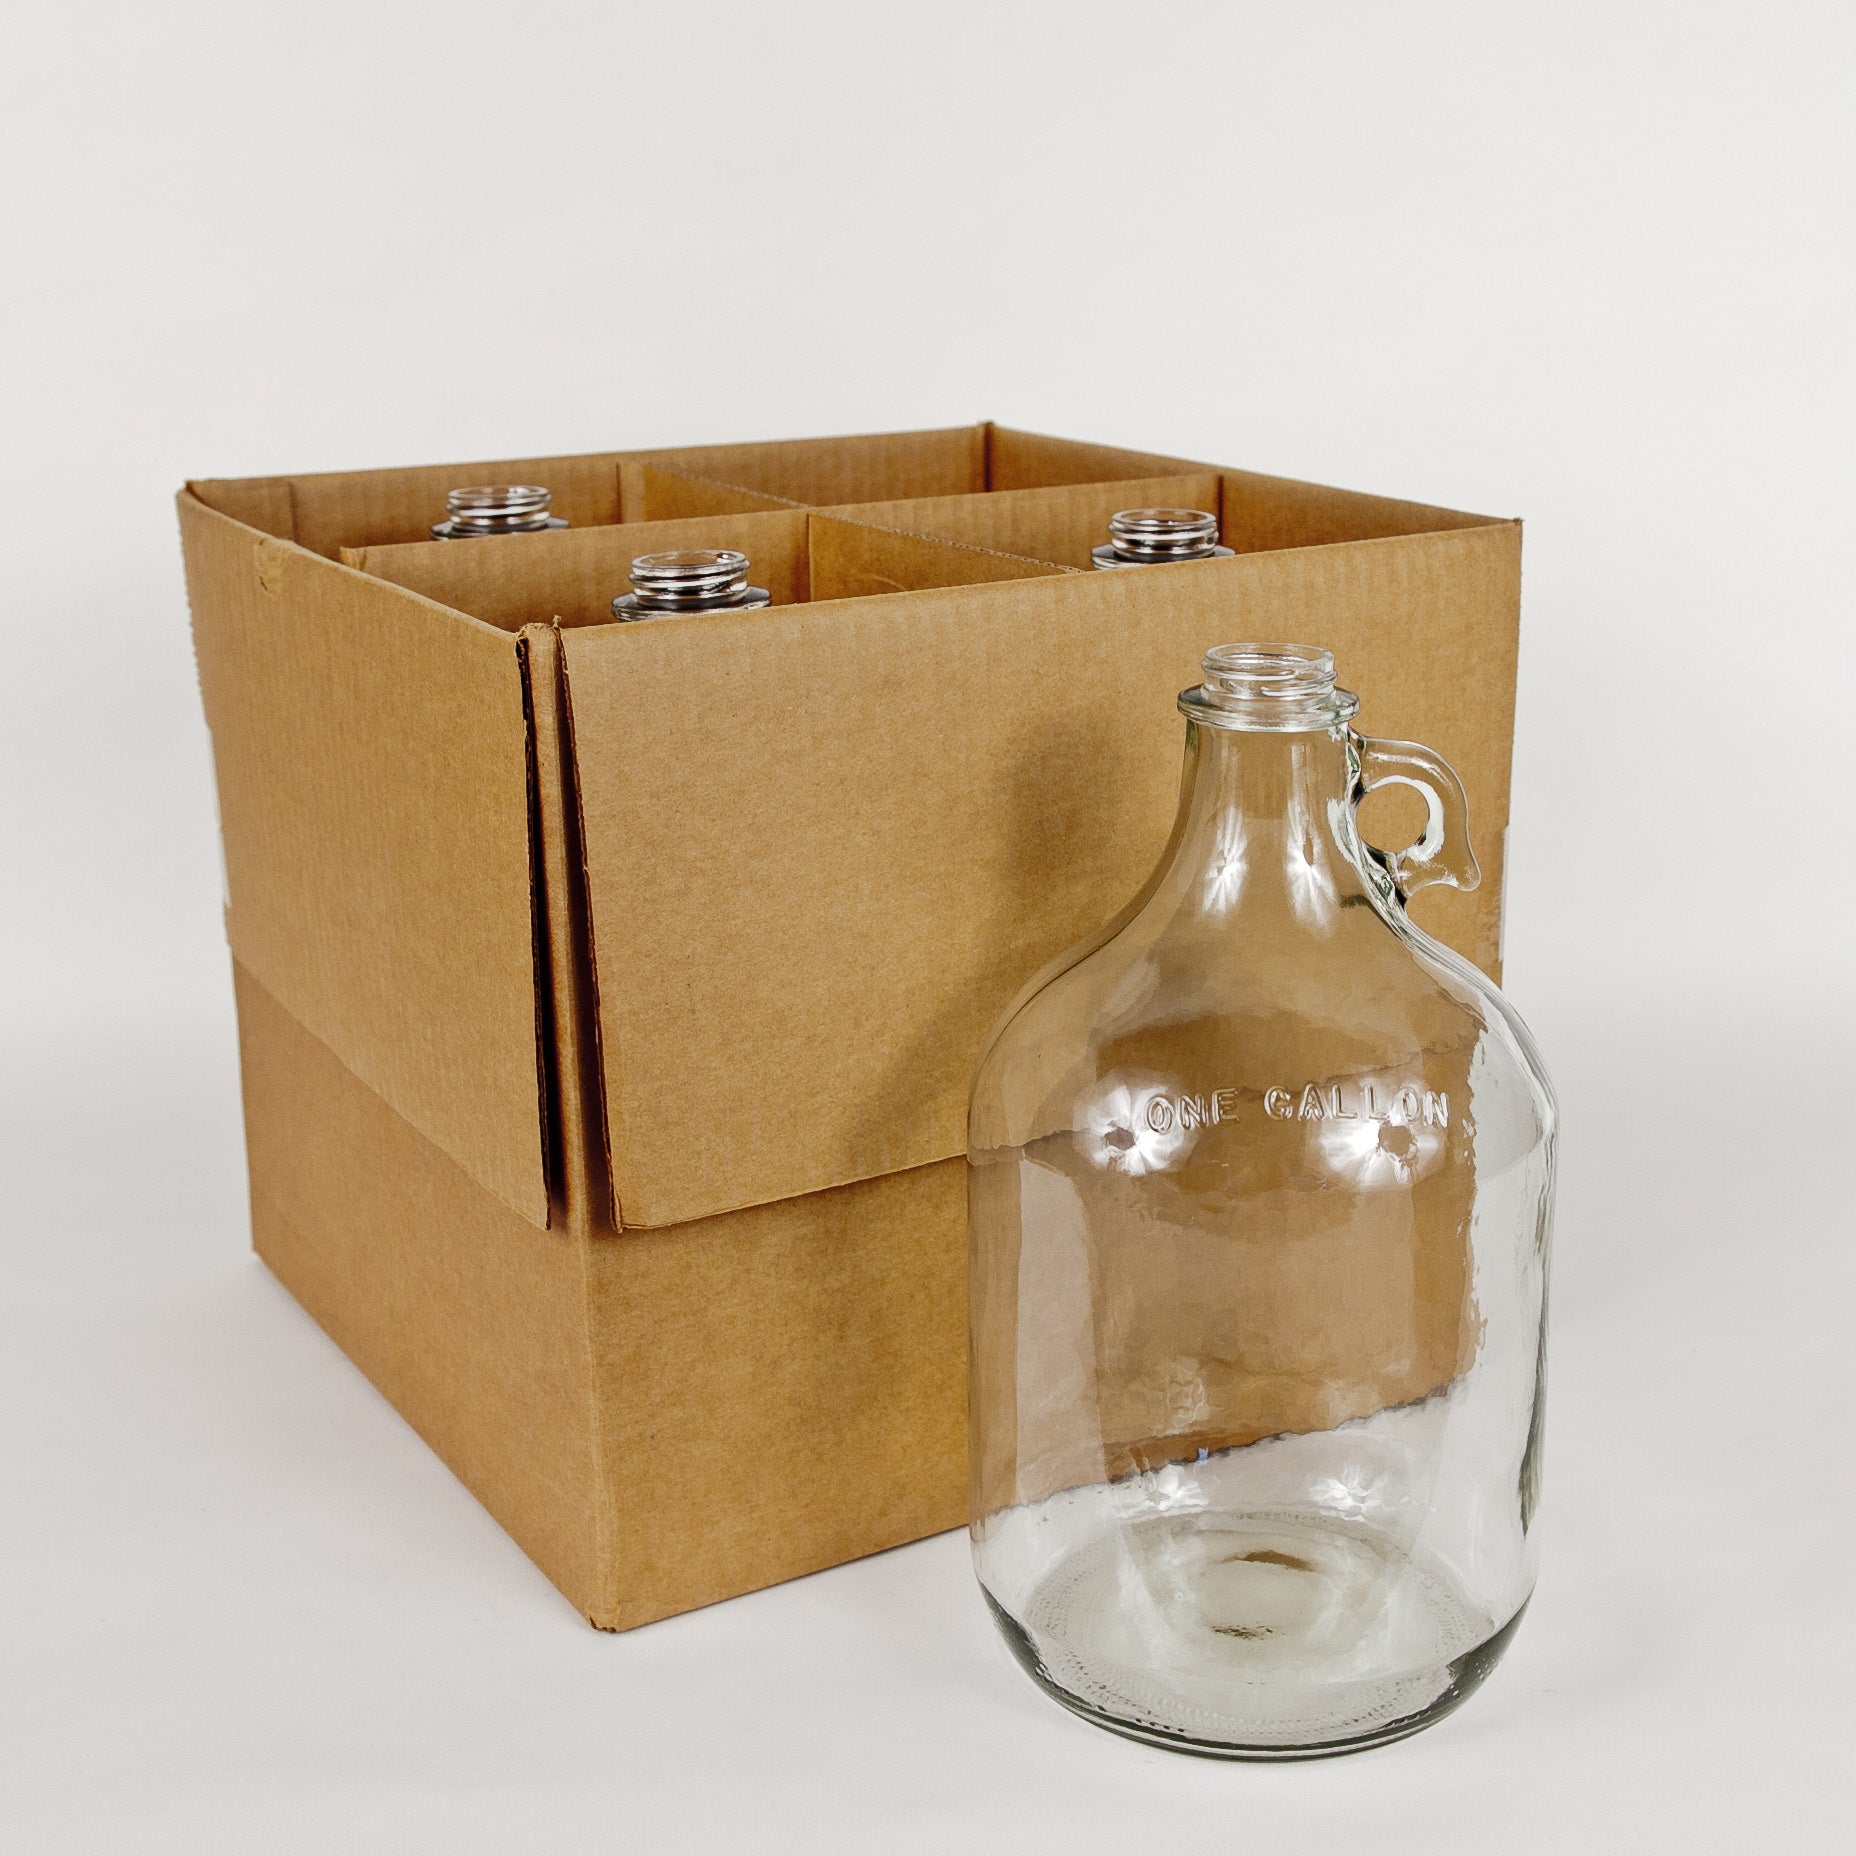  Dicunoy 1 Gallon Glass Jugs, 128 OZ Large Fermenting